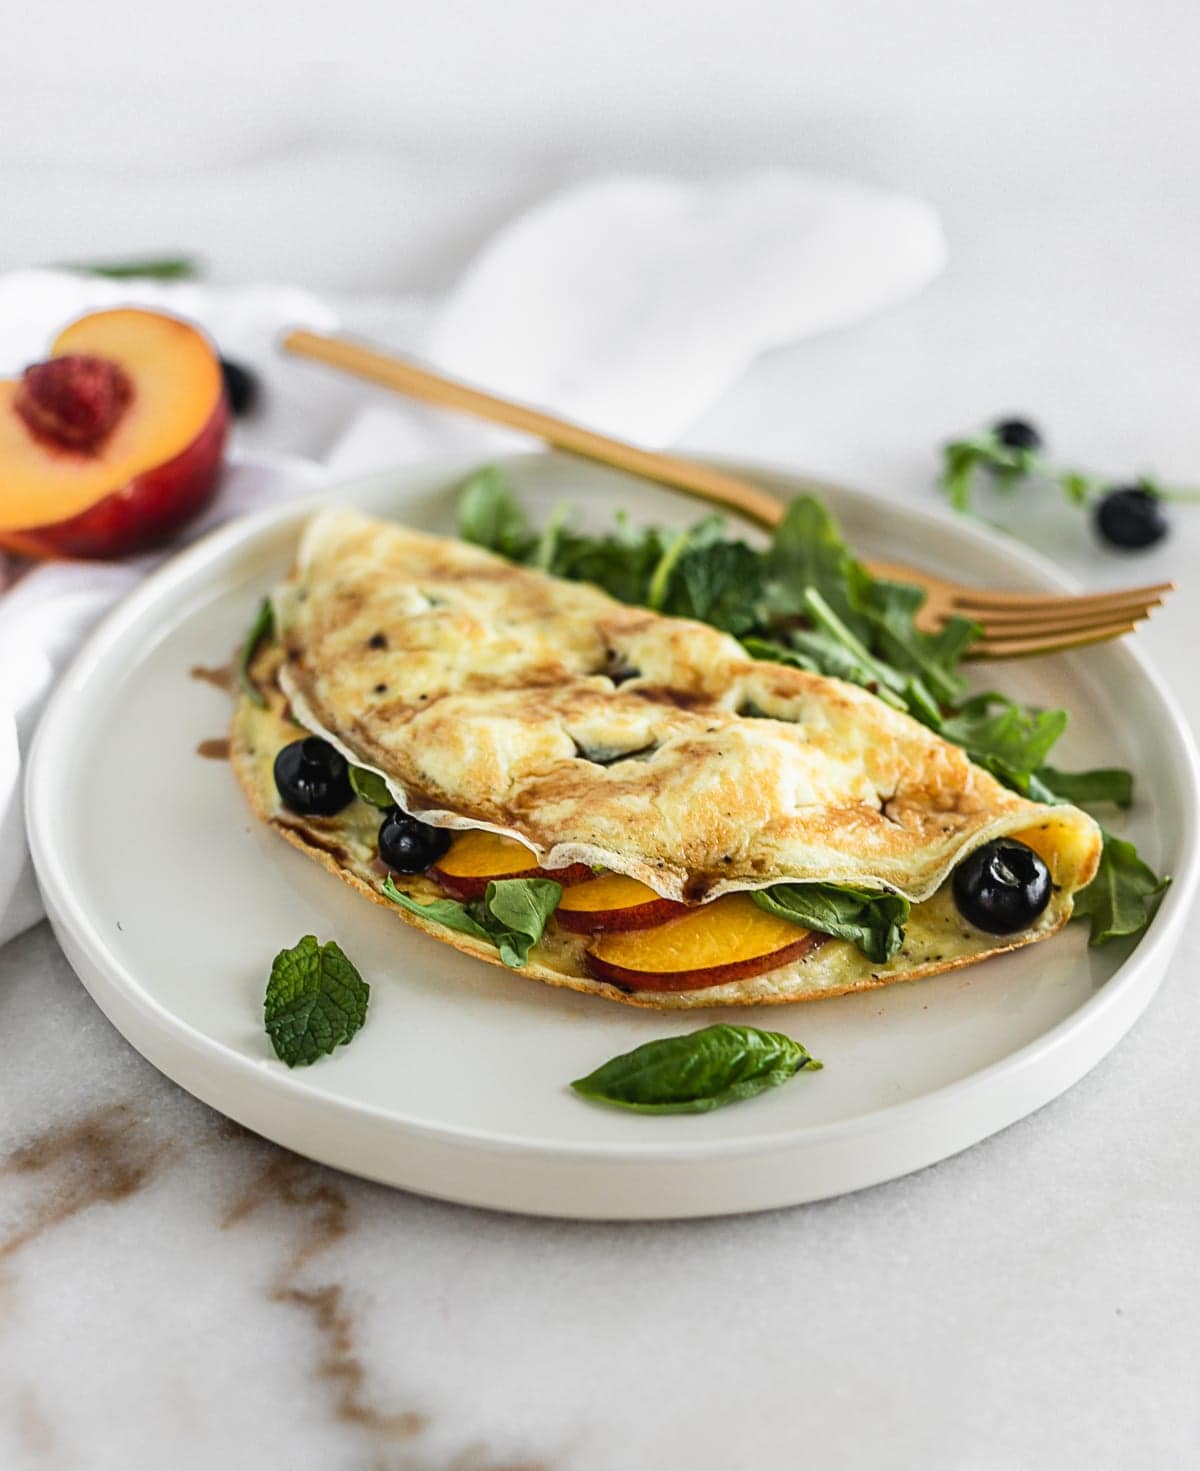 A Peach, Blueberry and Arugula Omelet is an easy, healthy omelet made with summer fruit and spicy arugula for a healthy meal any time of day! (gluten-free, vegetarian) | via livelytable.com